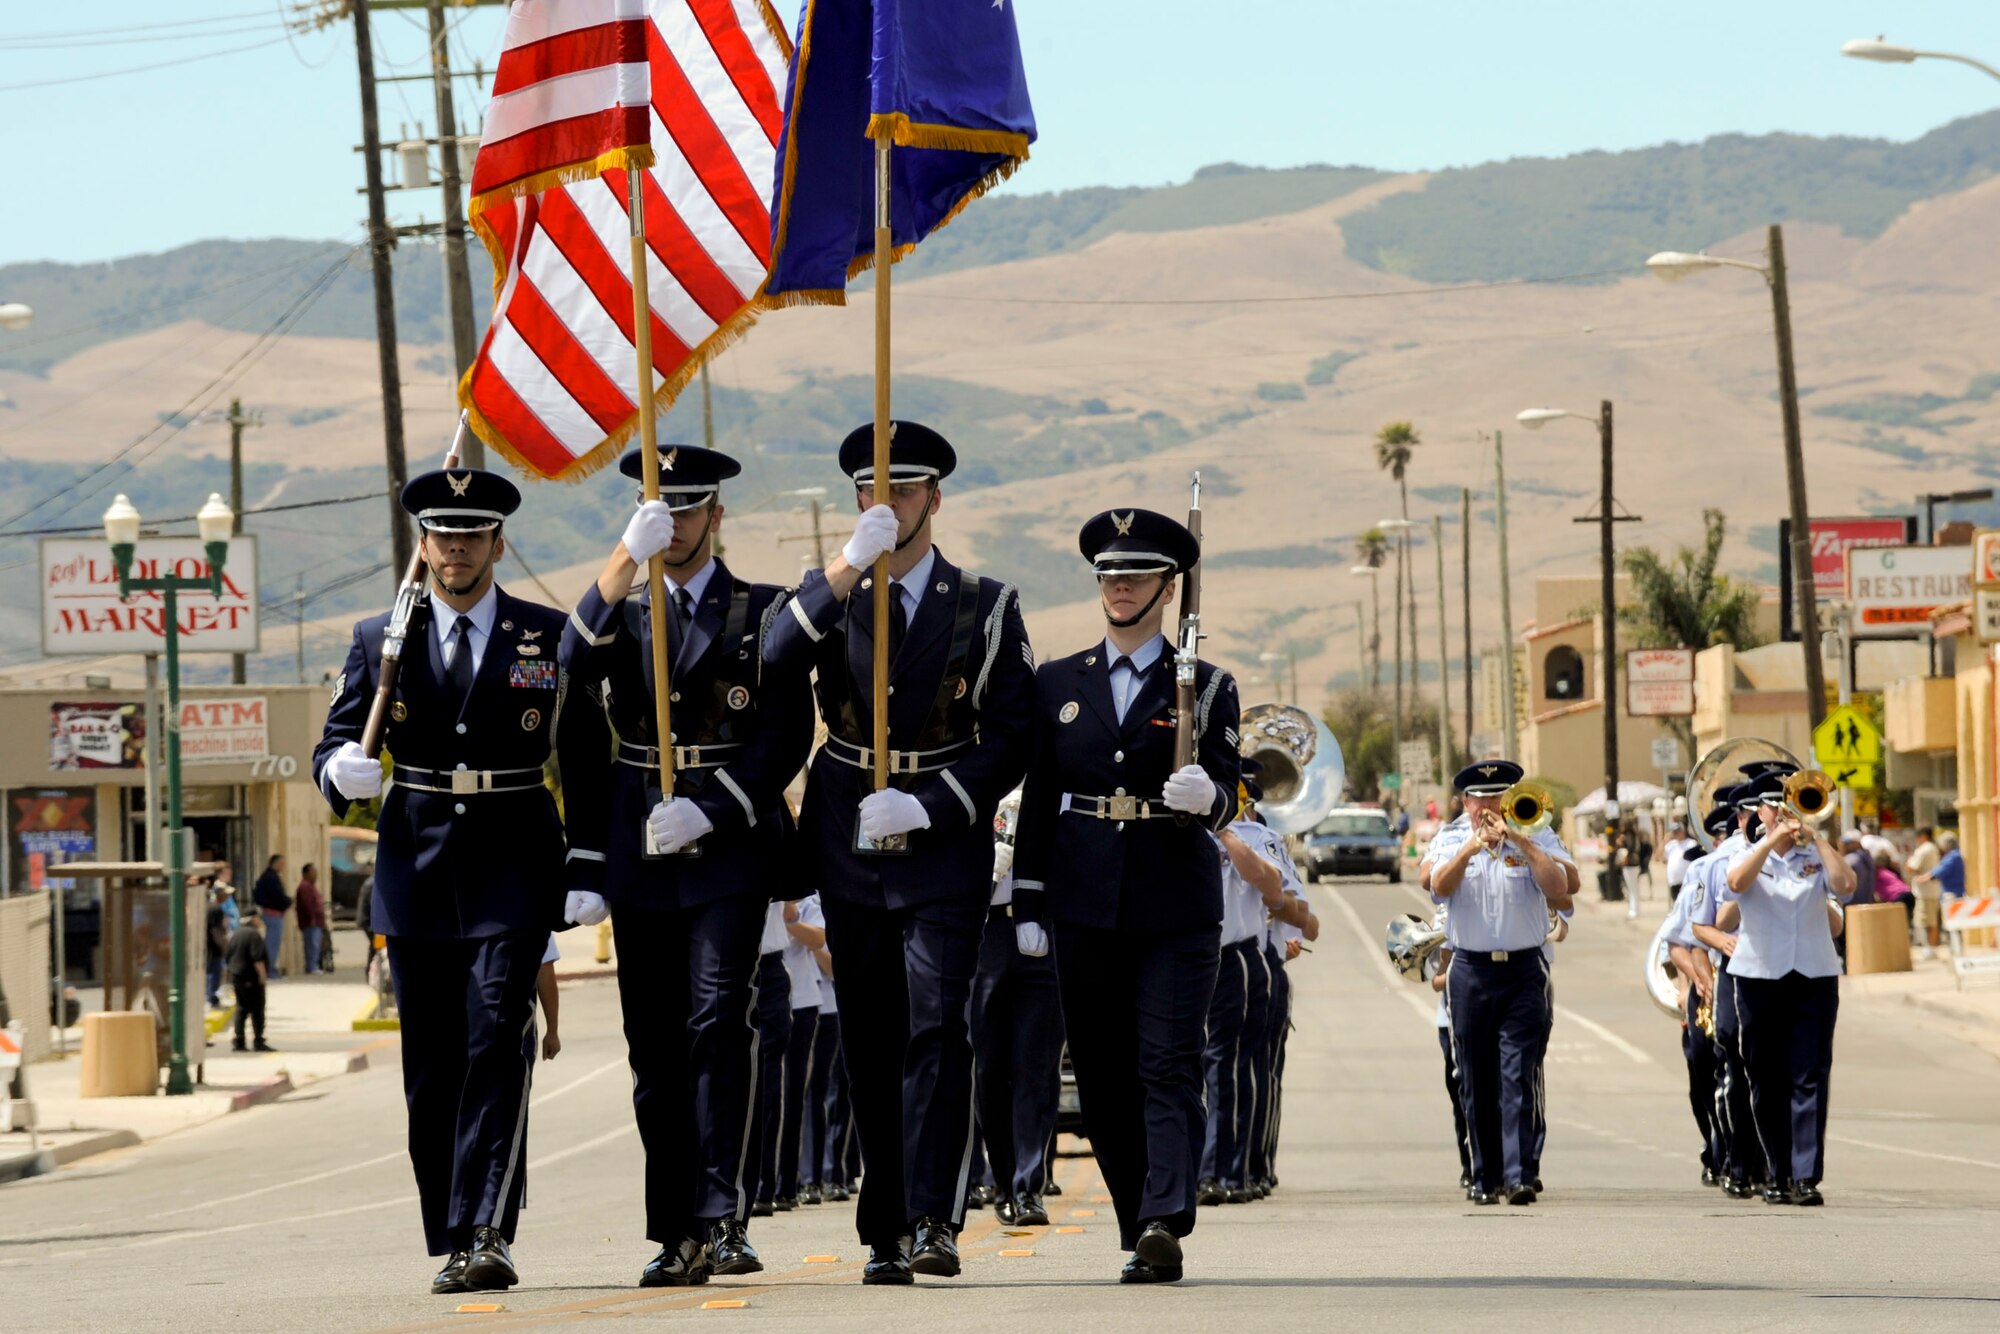 VANDENBERG AIR FORCE BASE, Calif. -- The Vandenberg Air Force Base Honor Guard marches in the Celebrate Heroes Parade in Guadalupe Saturday, June 30, 2012. The parade was a recognition of active and veteran members of the military and the city of Guadalupe intends to continue that recognition annually. (U.S. Air Force photo/Staff Sgt. Levi Riendeau)
